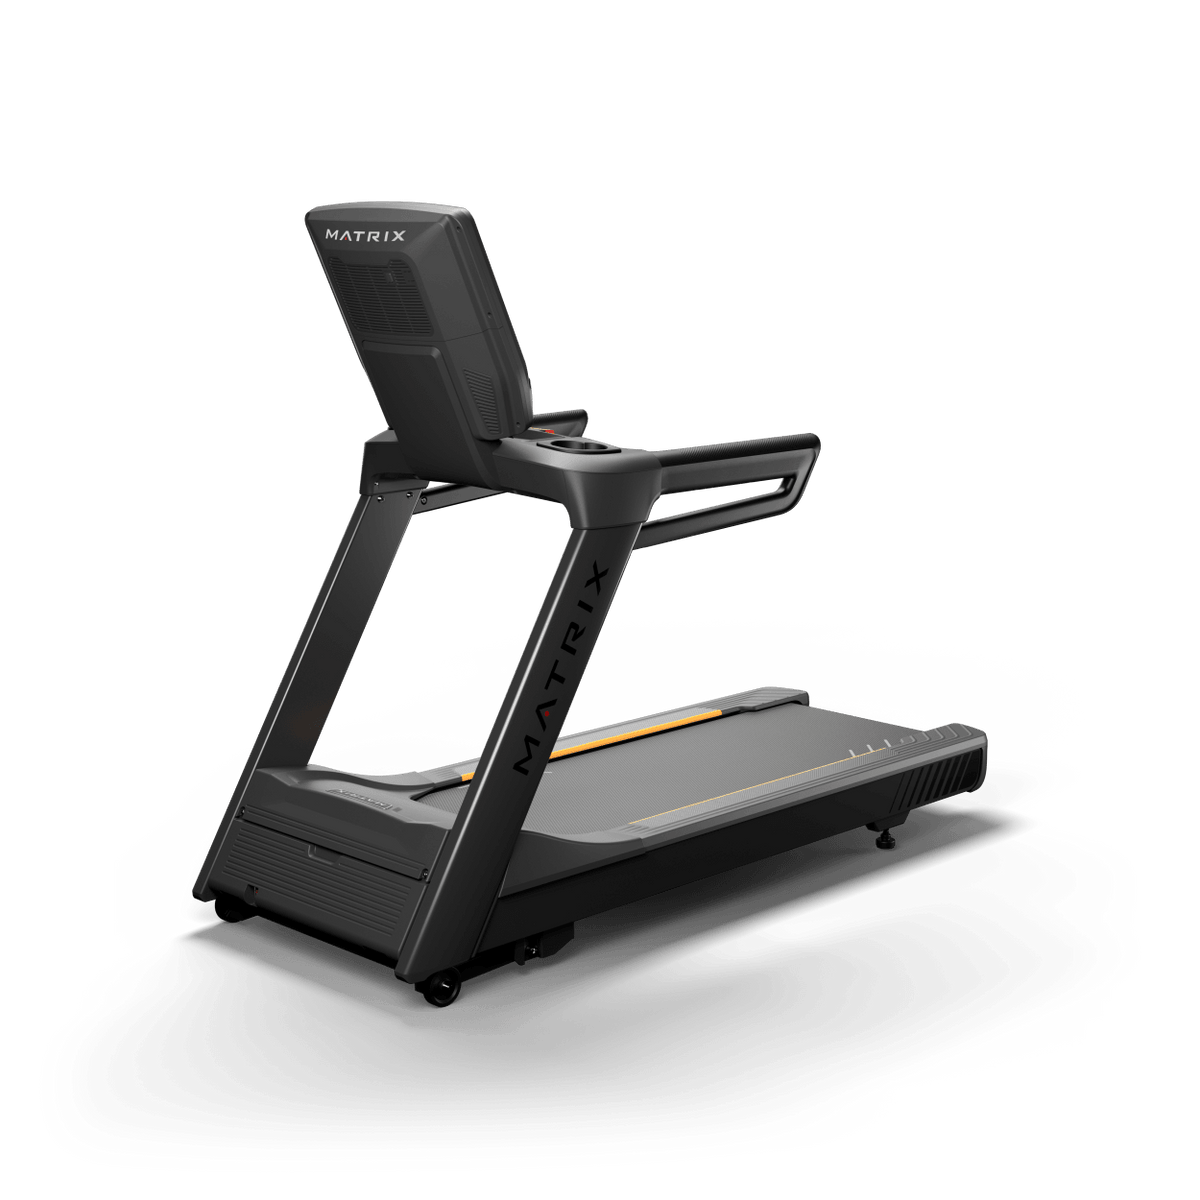 Matrix Fitness Lifestyle Treadmill with Group Training Console rear view | Fitness Experience